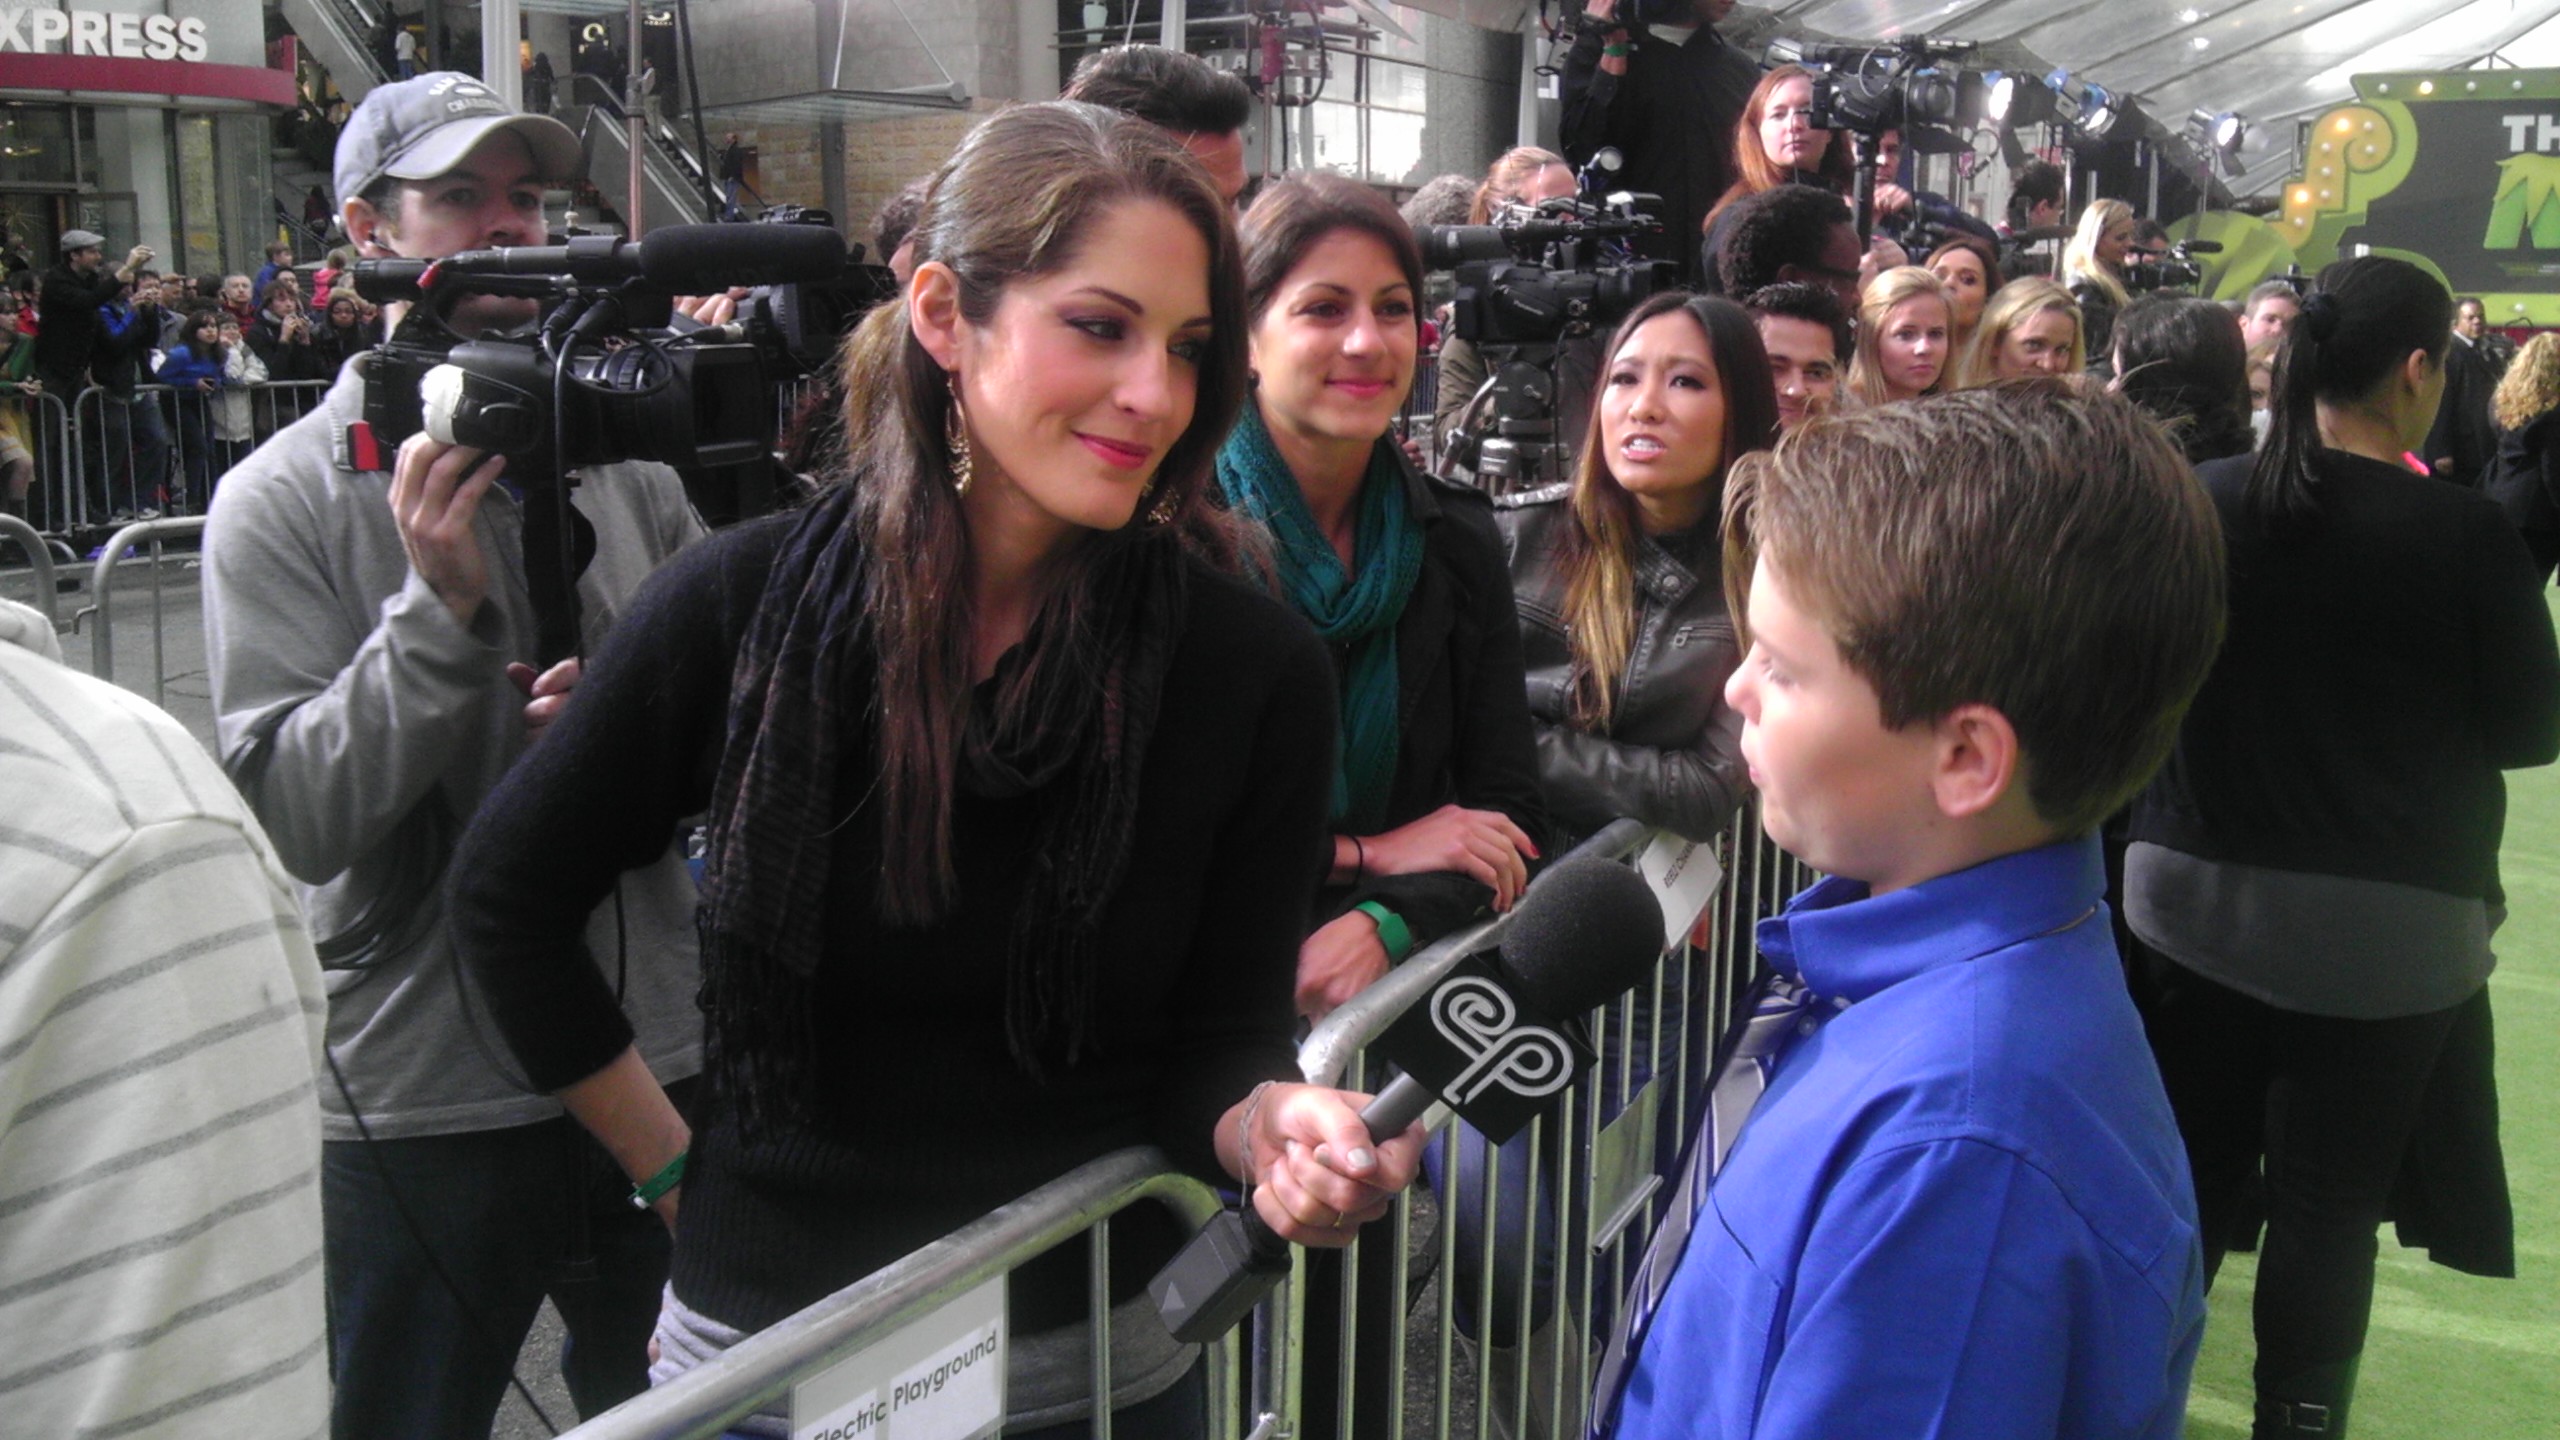 Reese Hartwig on the Green Carpet at the premiere of The Muppets. Punch Teacher scene with Ken Jeong